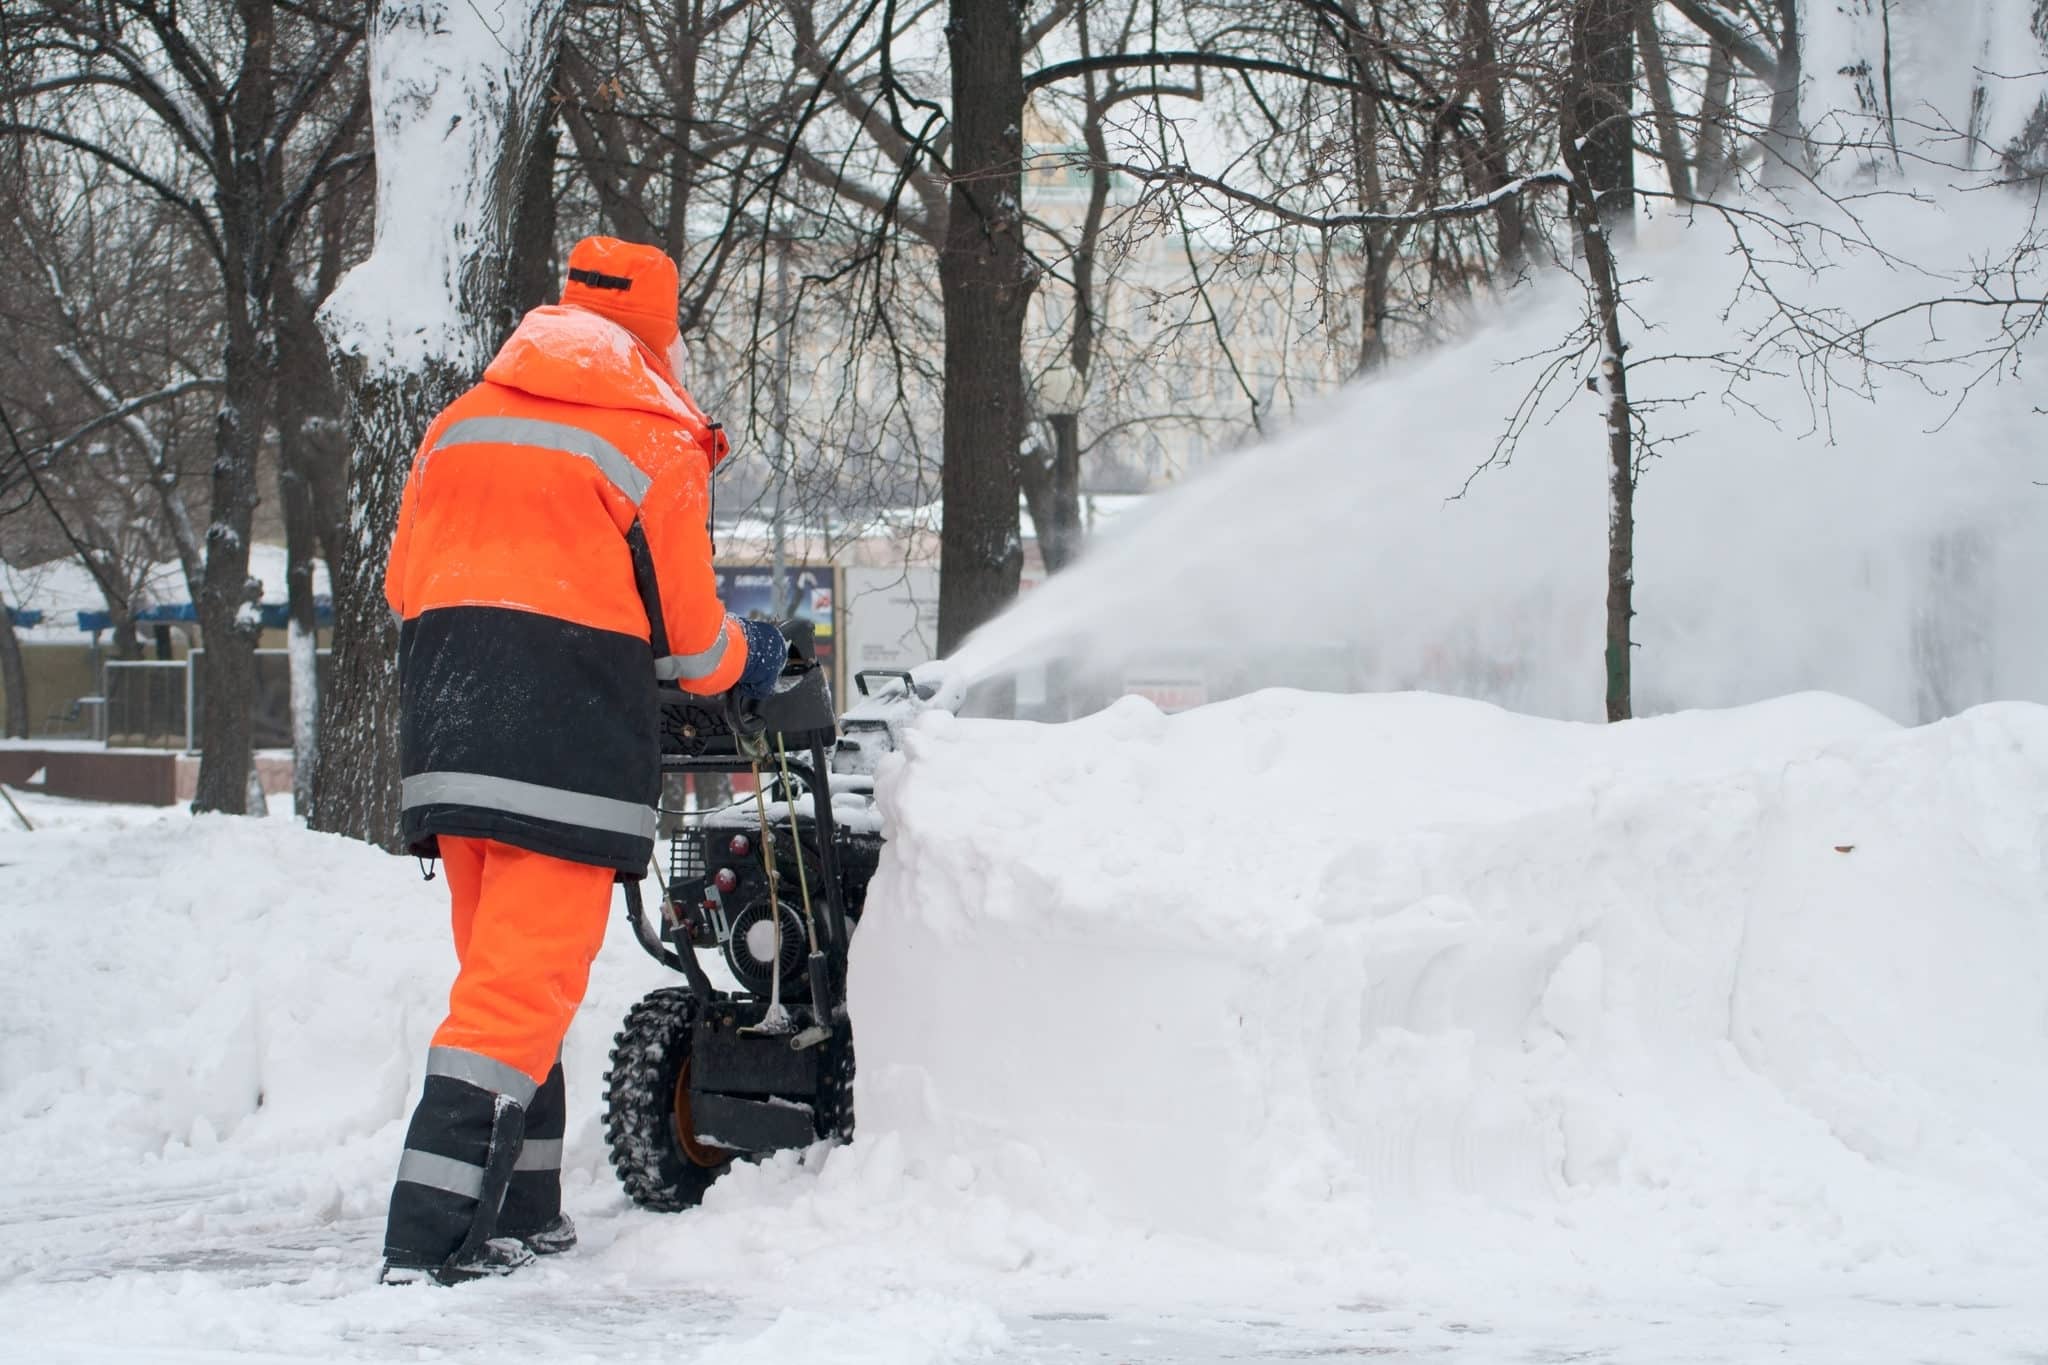 Snow blower being used by person in high vis